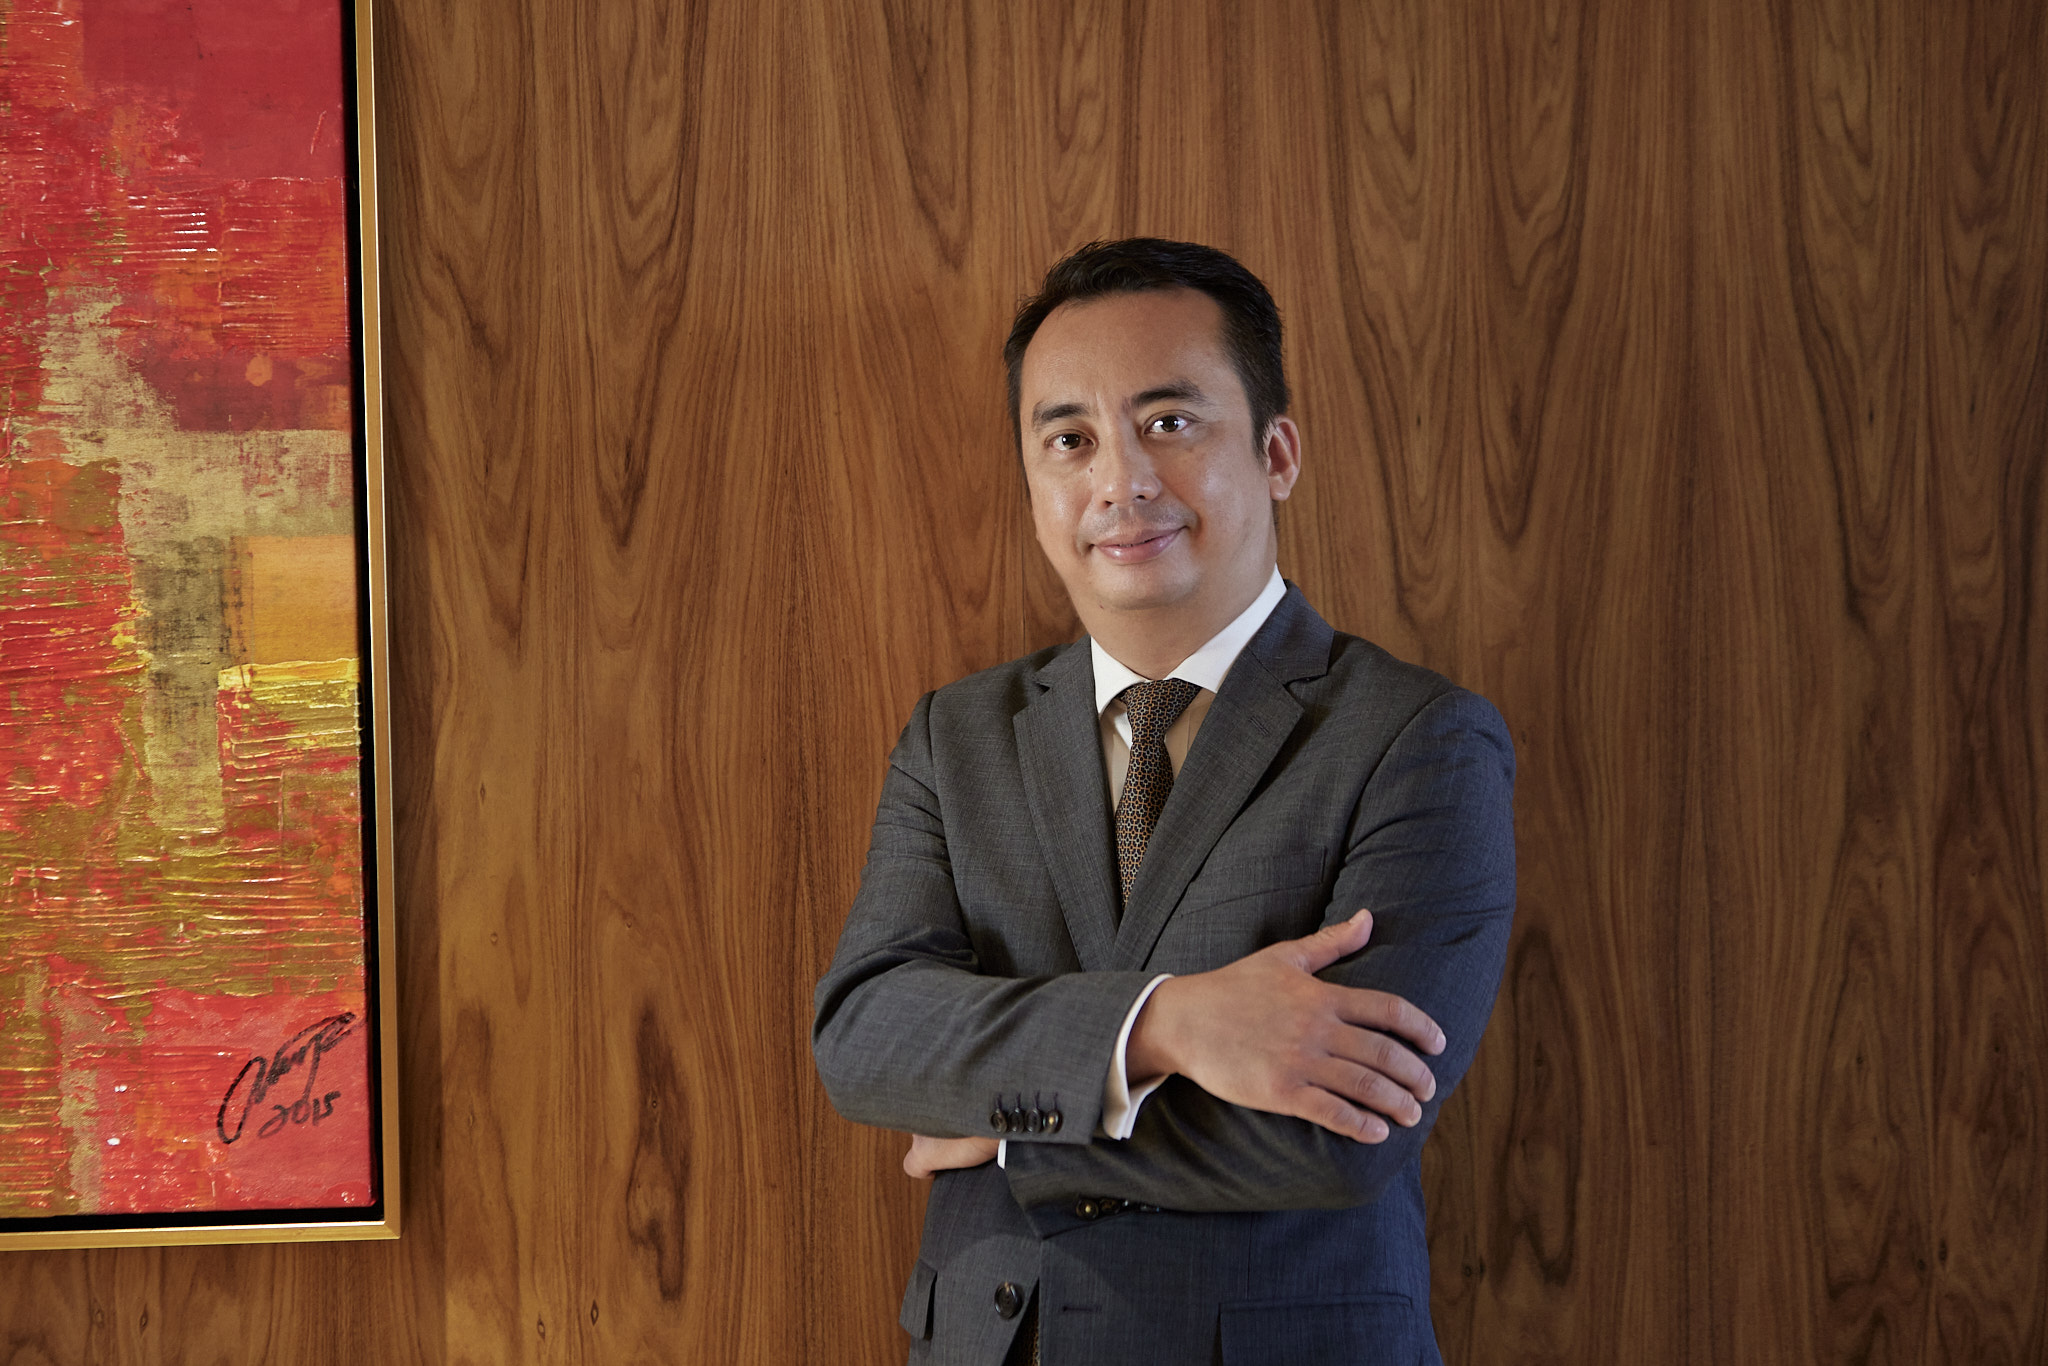 Filipe Ramos_Hotel Manager Sheraton Grand Macao The St Regis Macao_vertical red background_Macao News